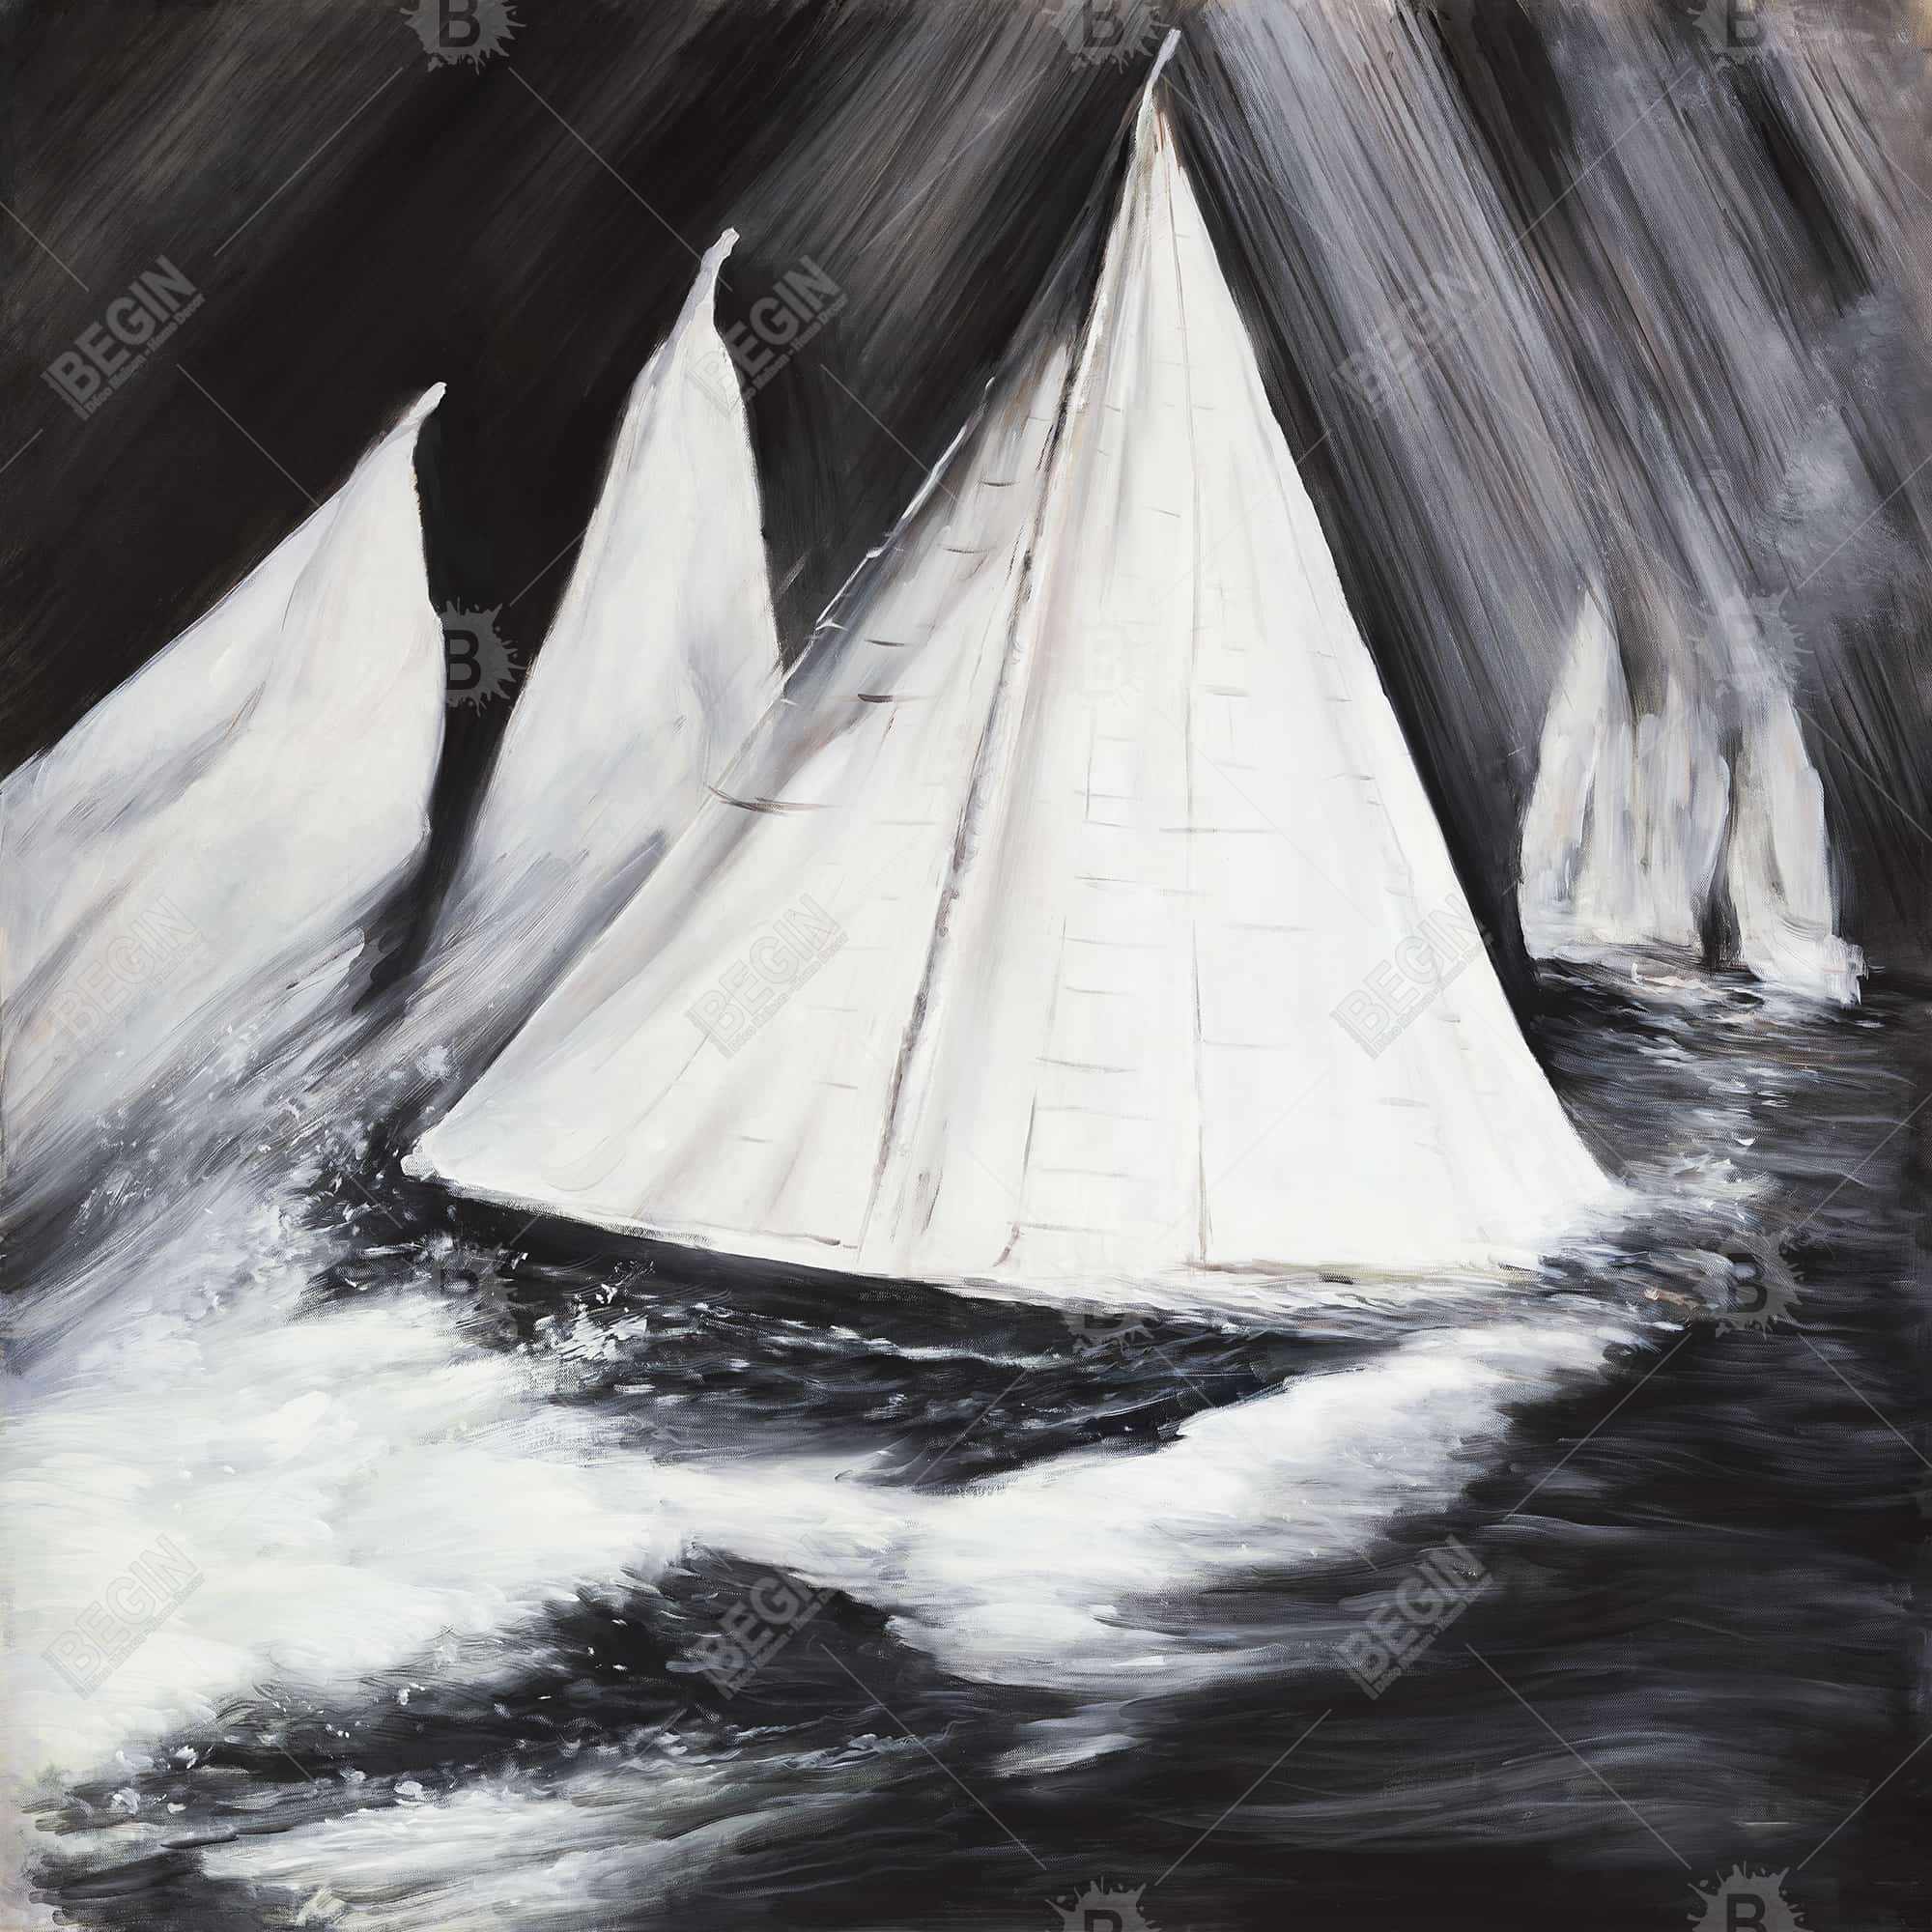 Grayscale boats in a storm